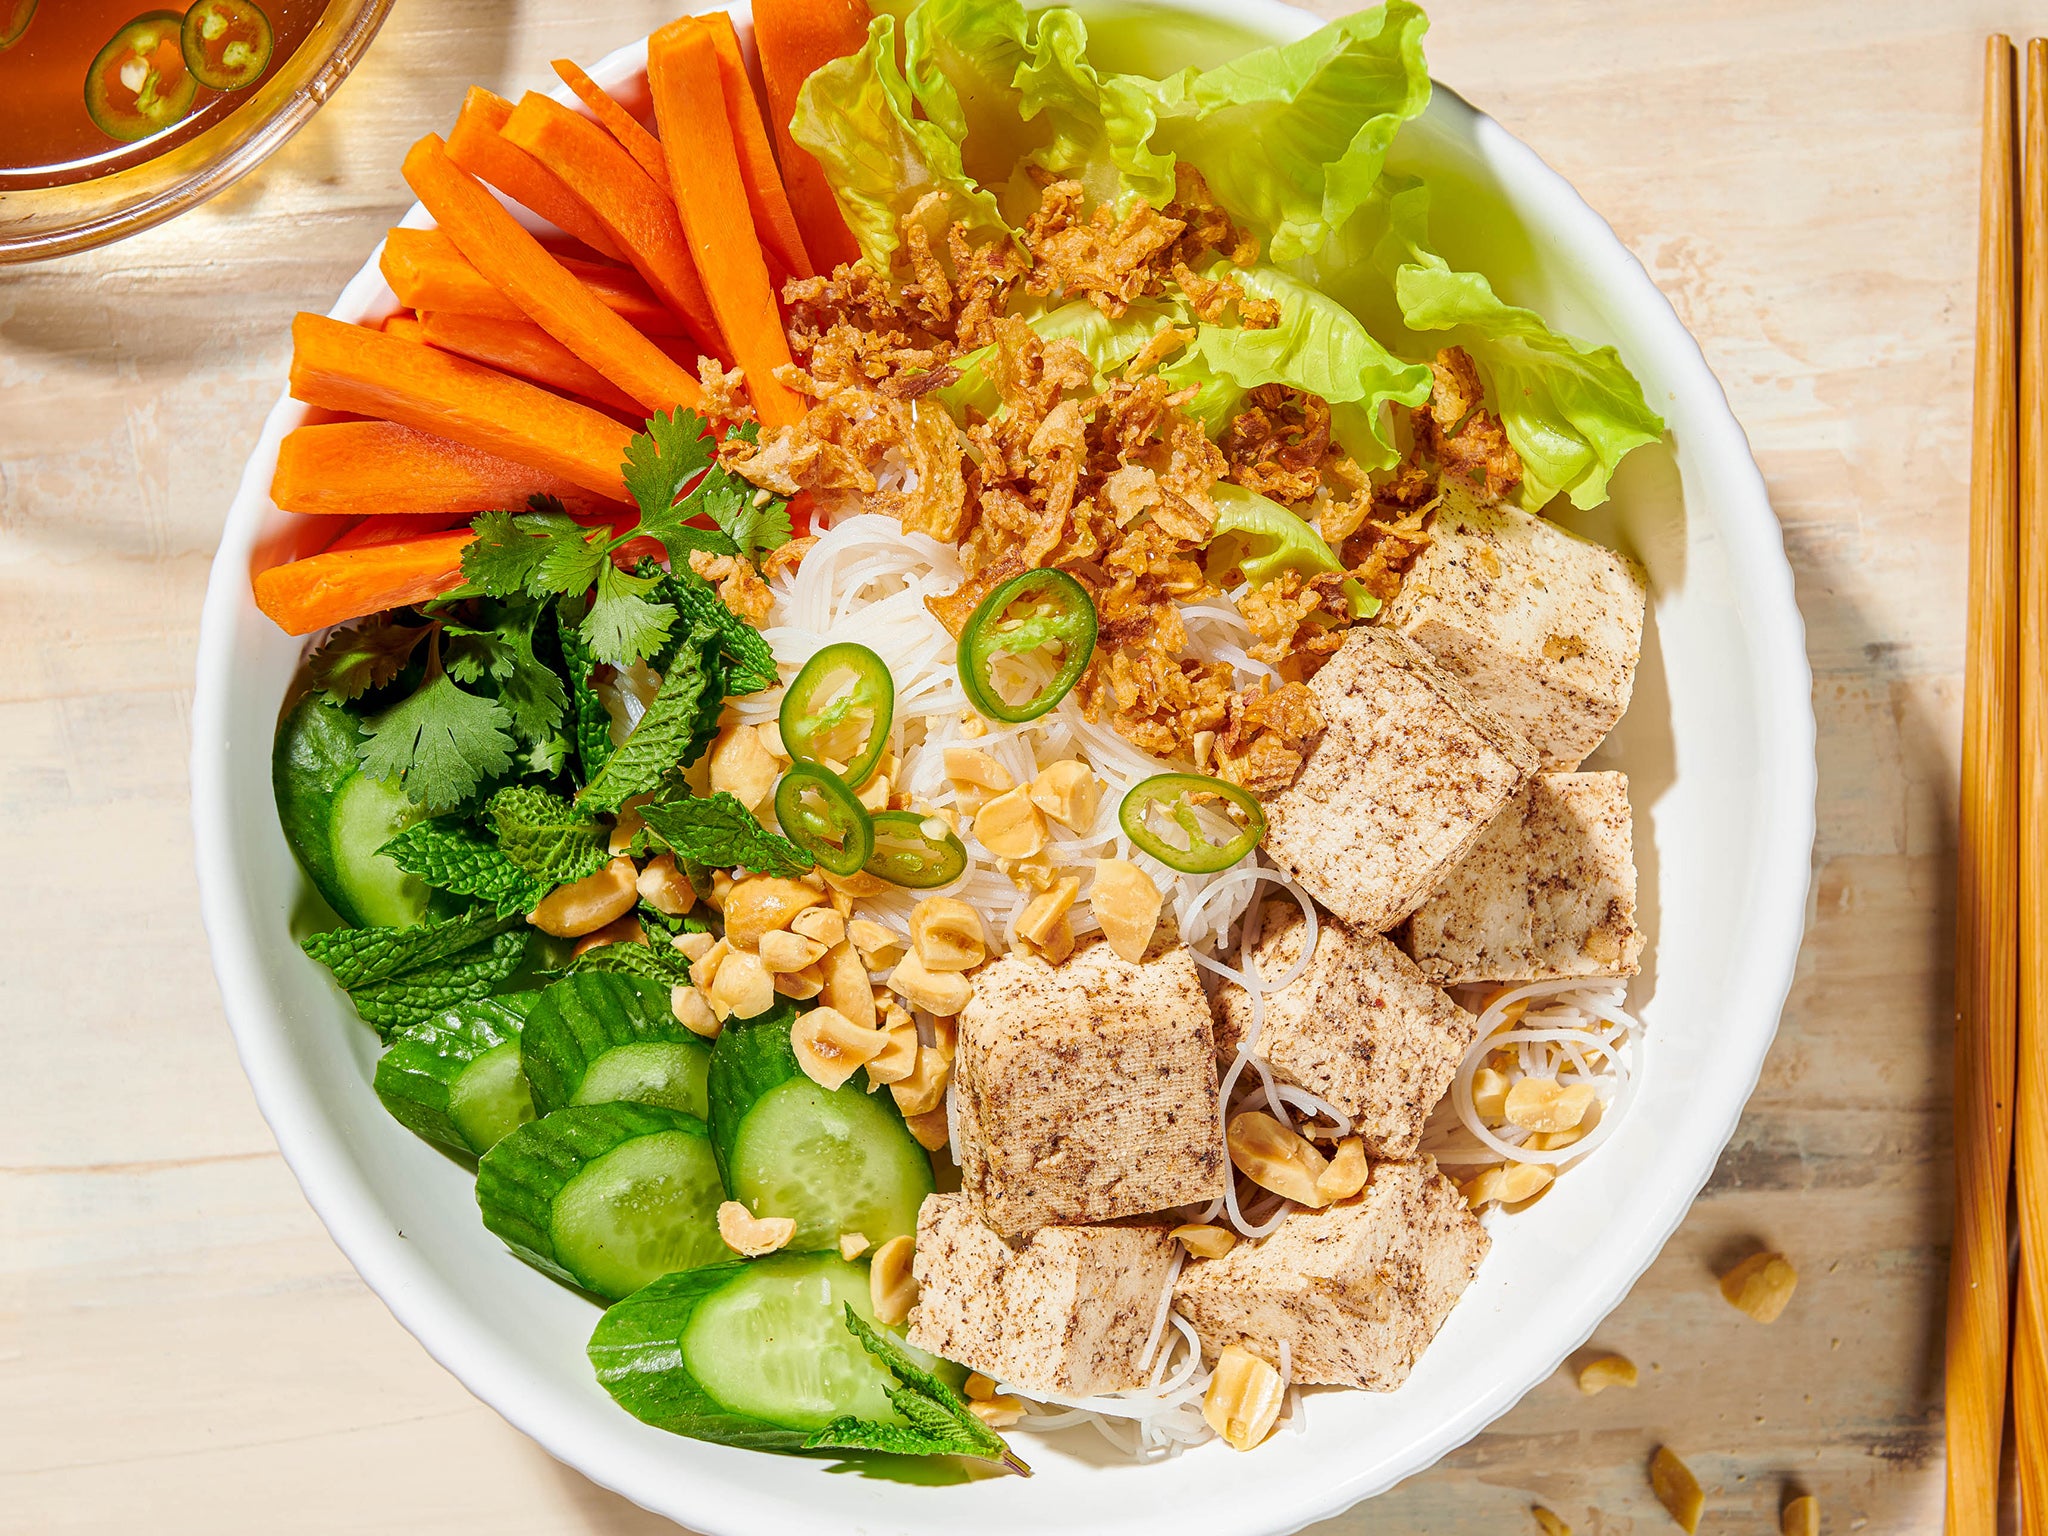 How to make no-cook Vietnamese tofu bún bowls | The Independent